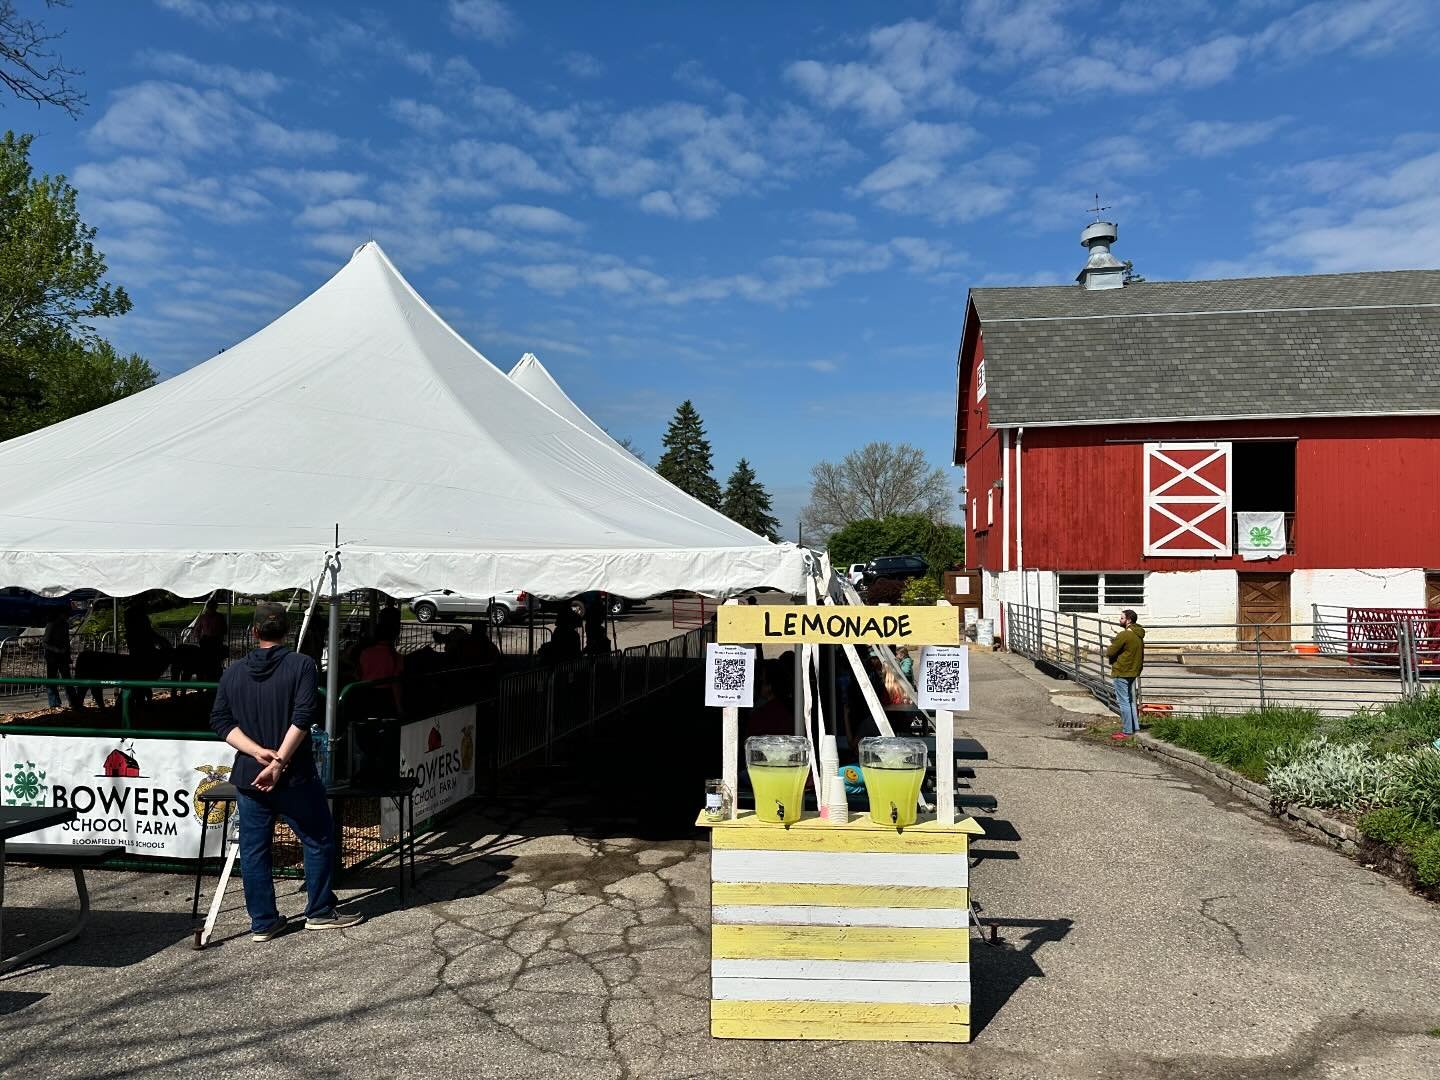 It&rsquo;s a beautiful day to come on out to Open Barn! This morning the @bowersfarm4h and @bloomfieldhillsffa clubs are hosting a Showmanship Clinic with their projects. This is open to all club members and visitors to watch, wonder and learn!